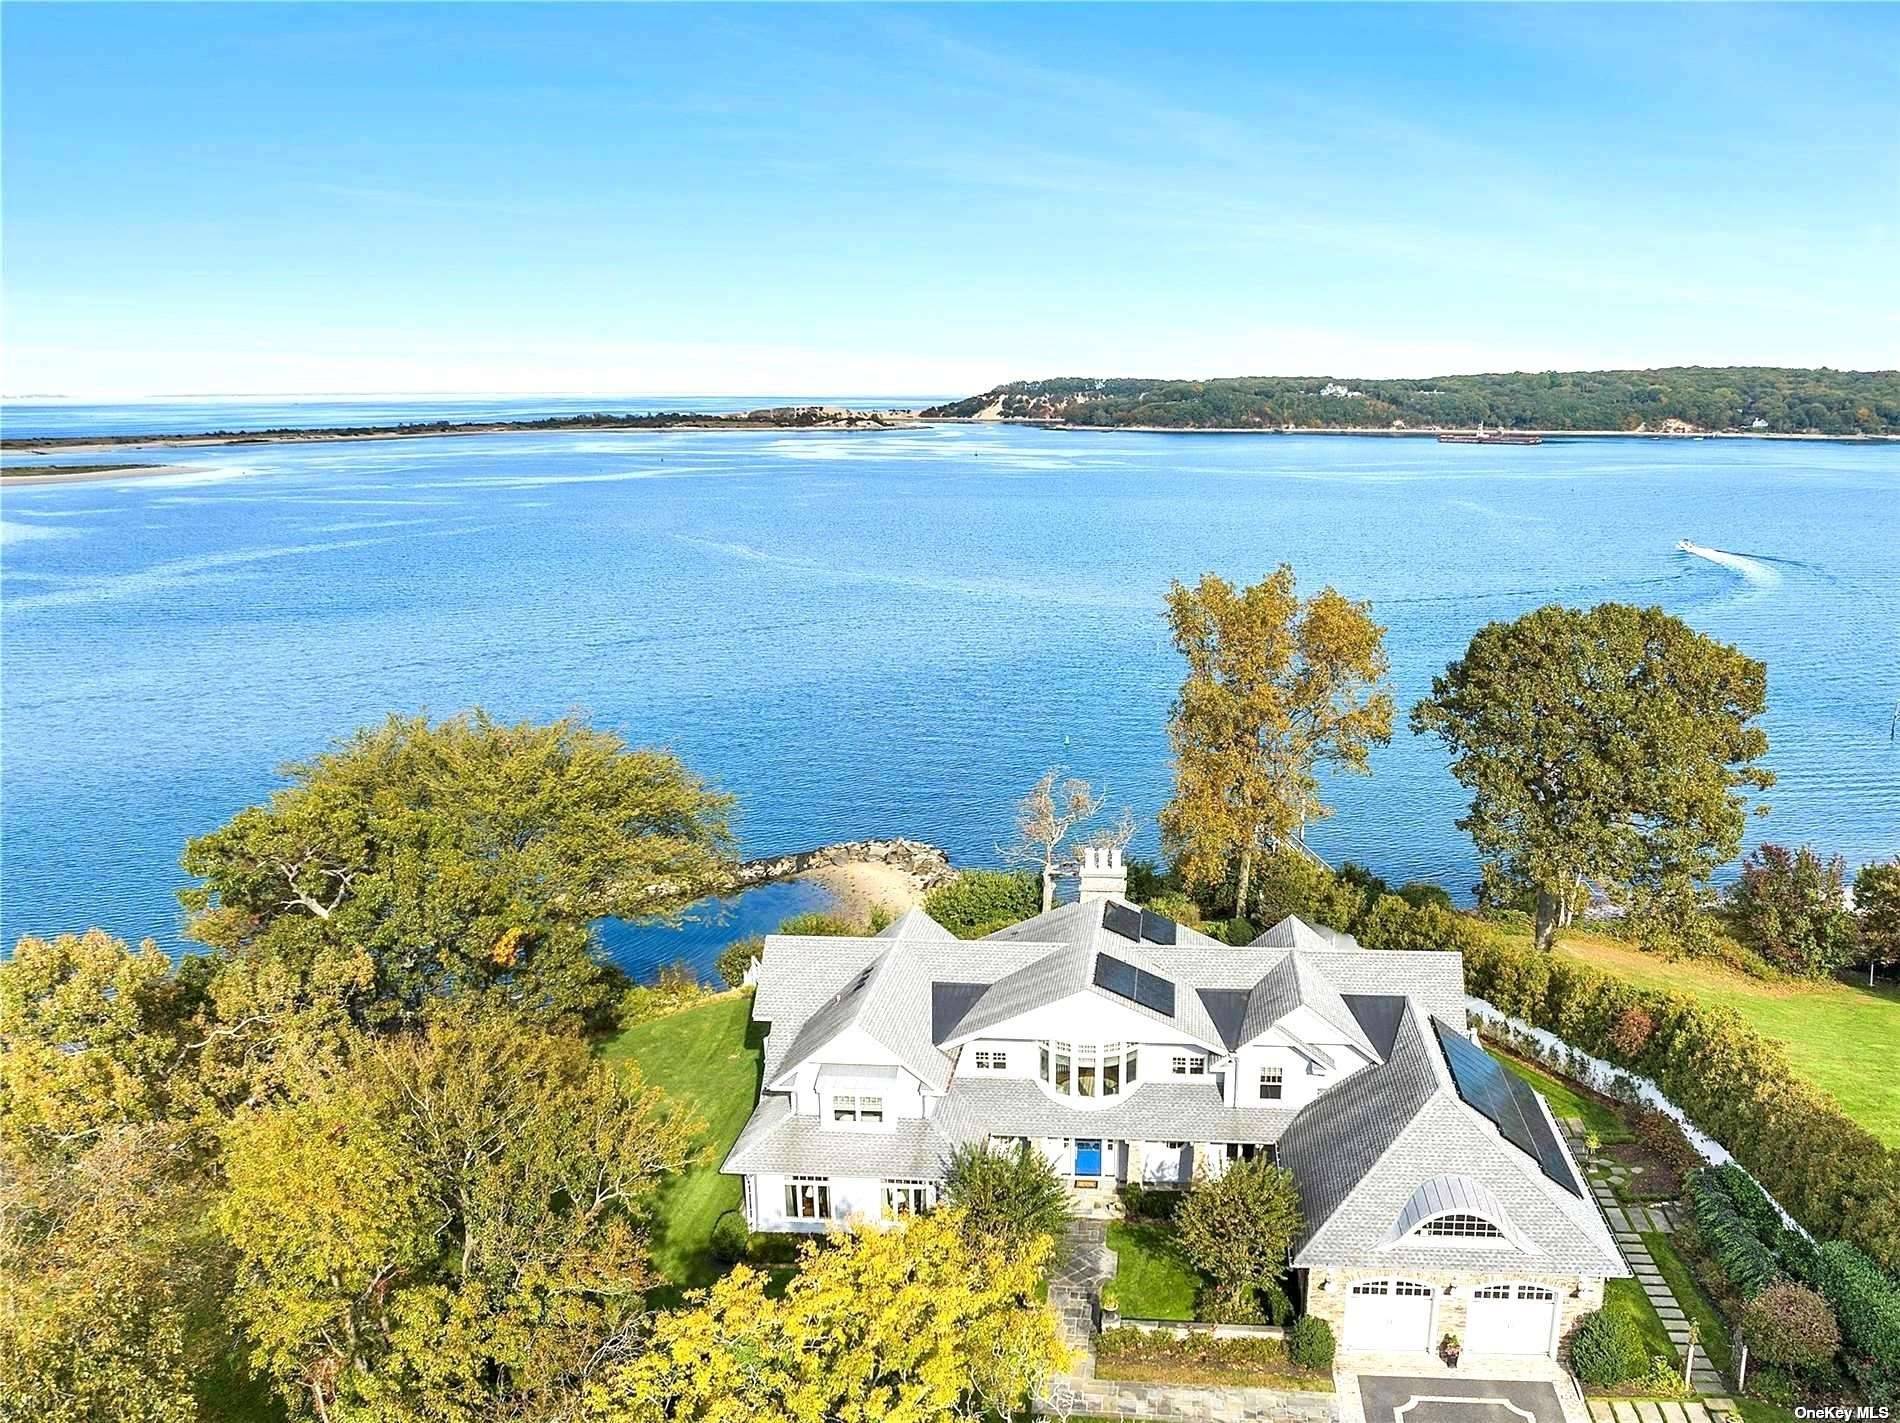 HERON'S COVE WATERFRONT Private and secluded, this spectacular waterfront property has stunning panoramic views from Setauket and Port Jefferson Harbors and the Long Island Sound to Connecticut.